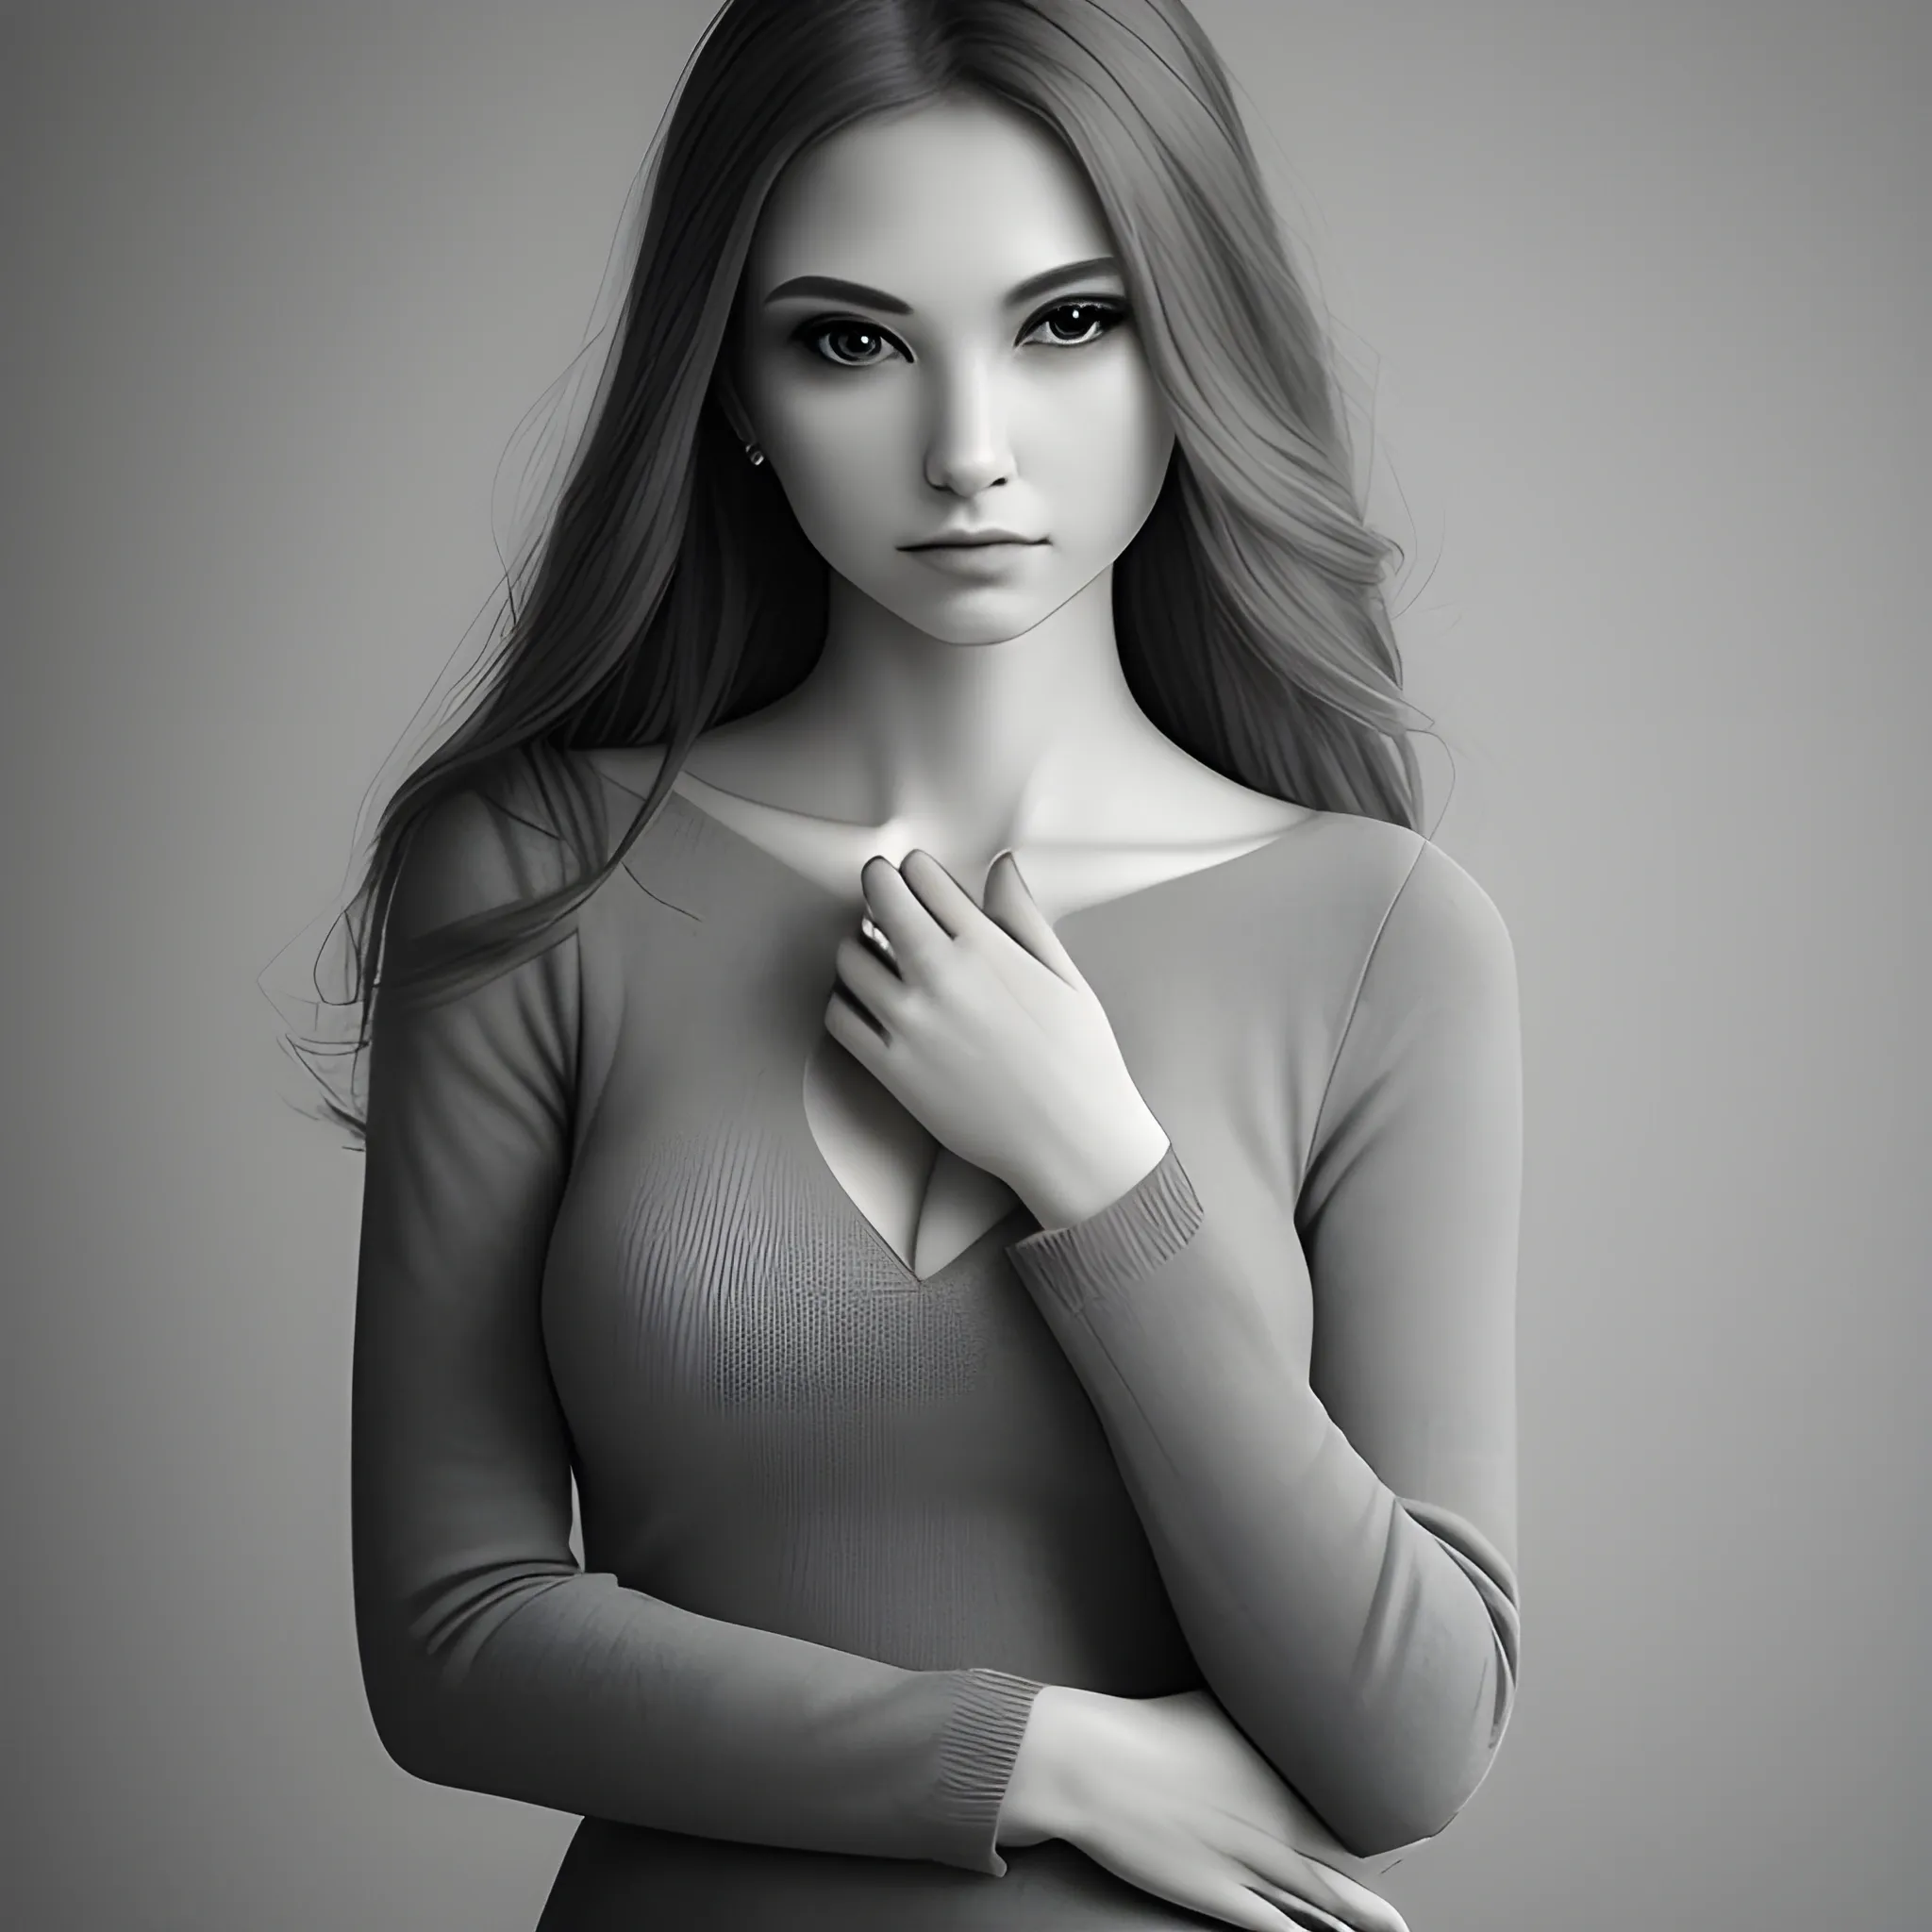 beautiful woman, gray tones, solemn and elegant, professional photography